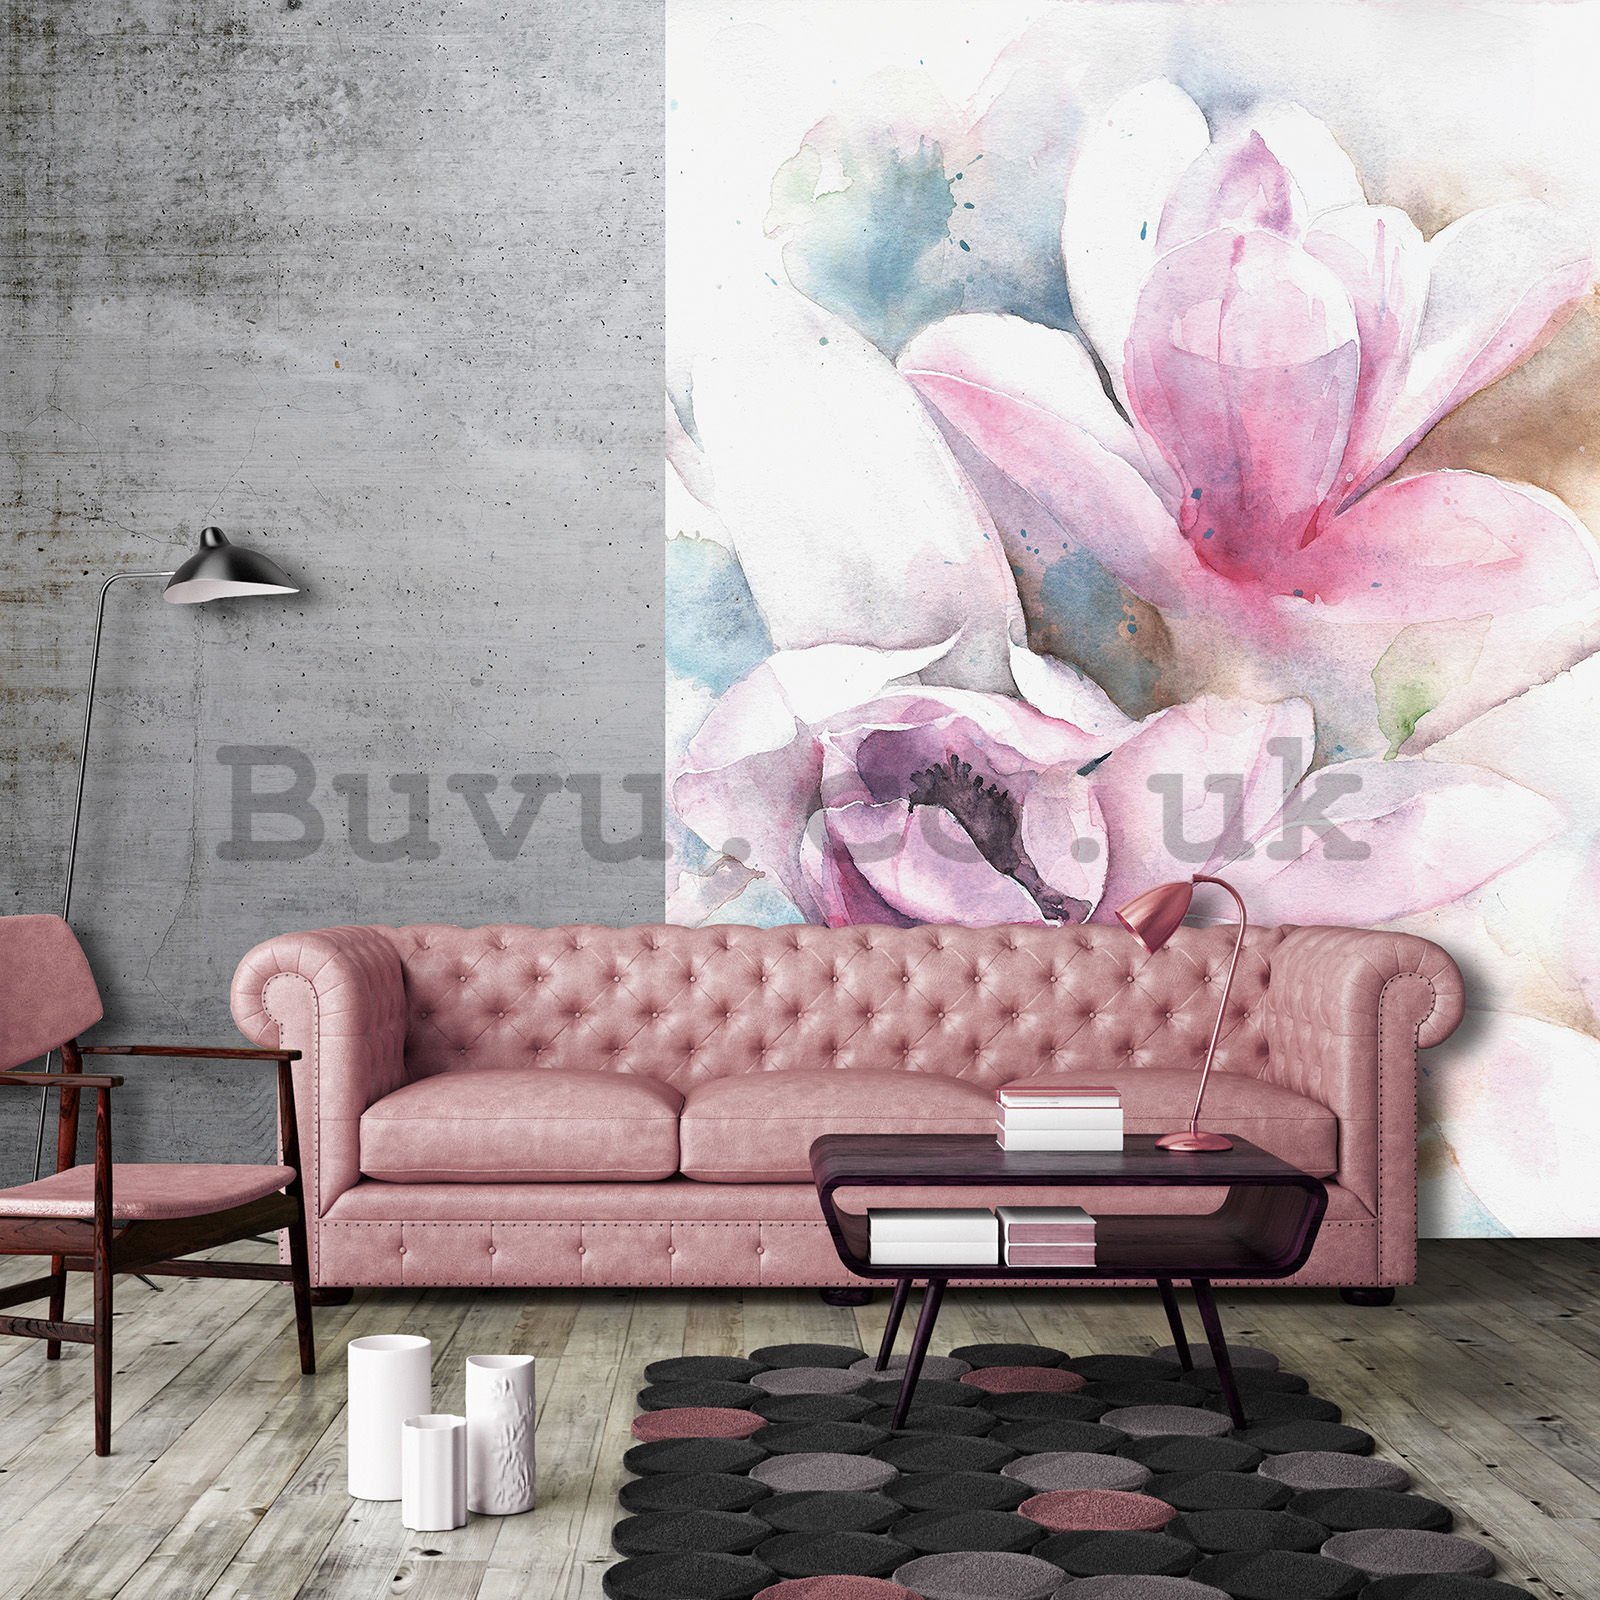 Wall mural: Magnolia (painted) - 184x254 cm